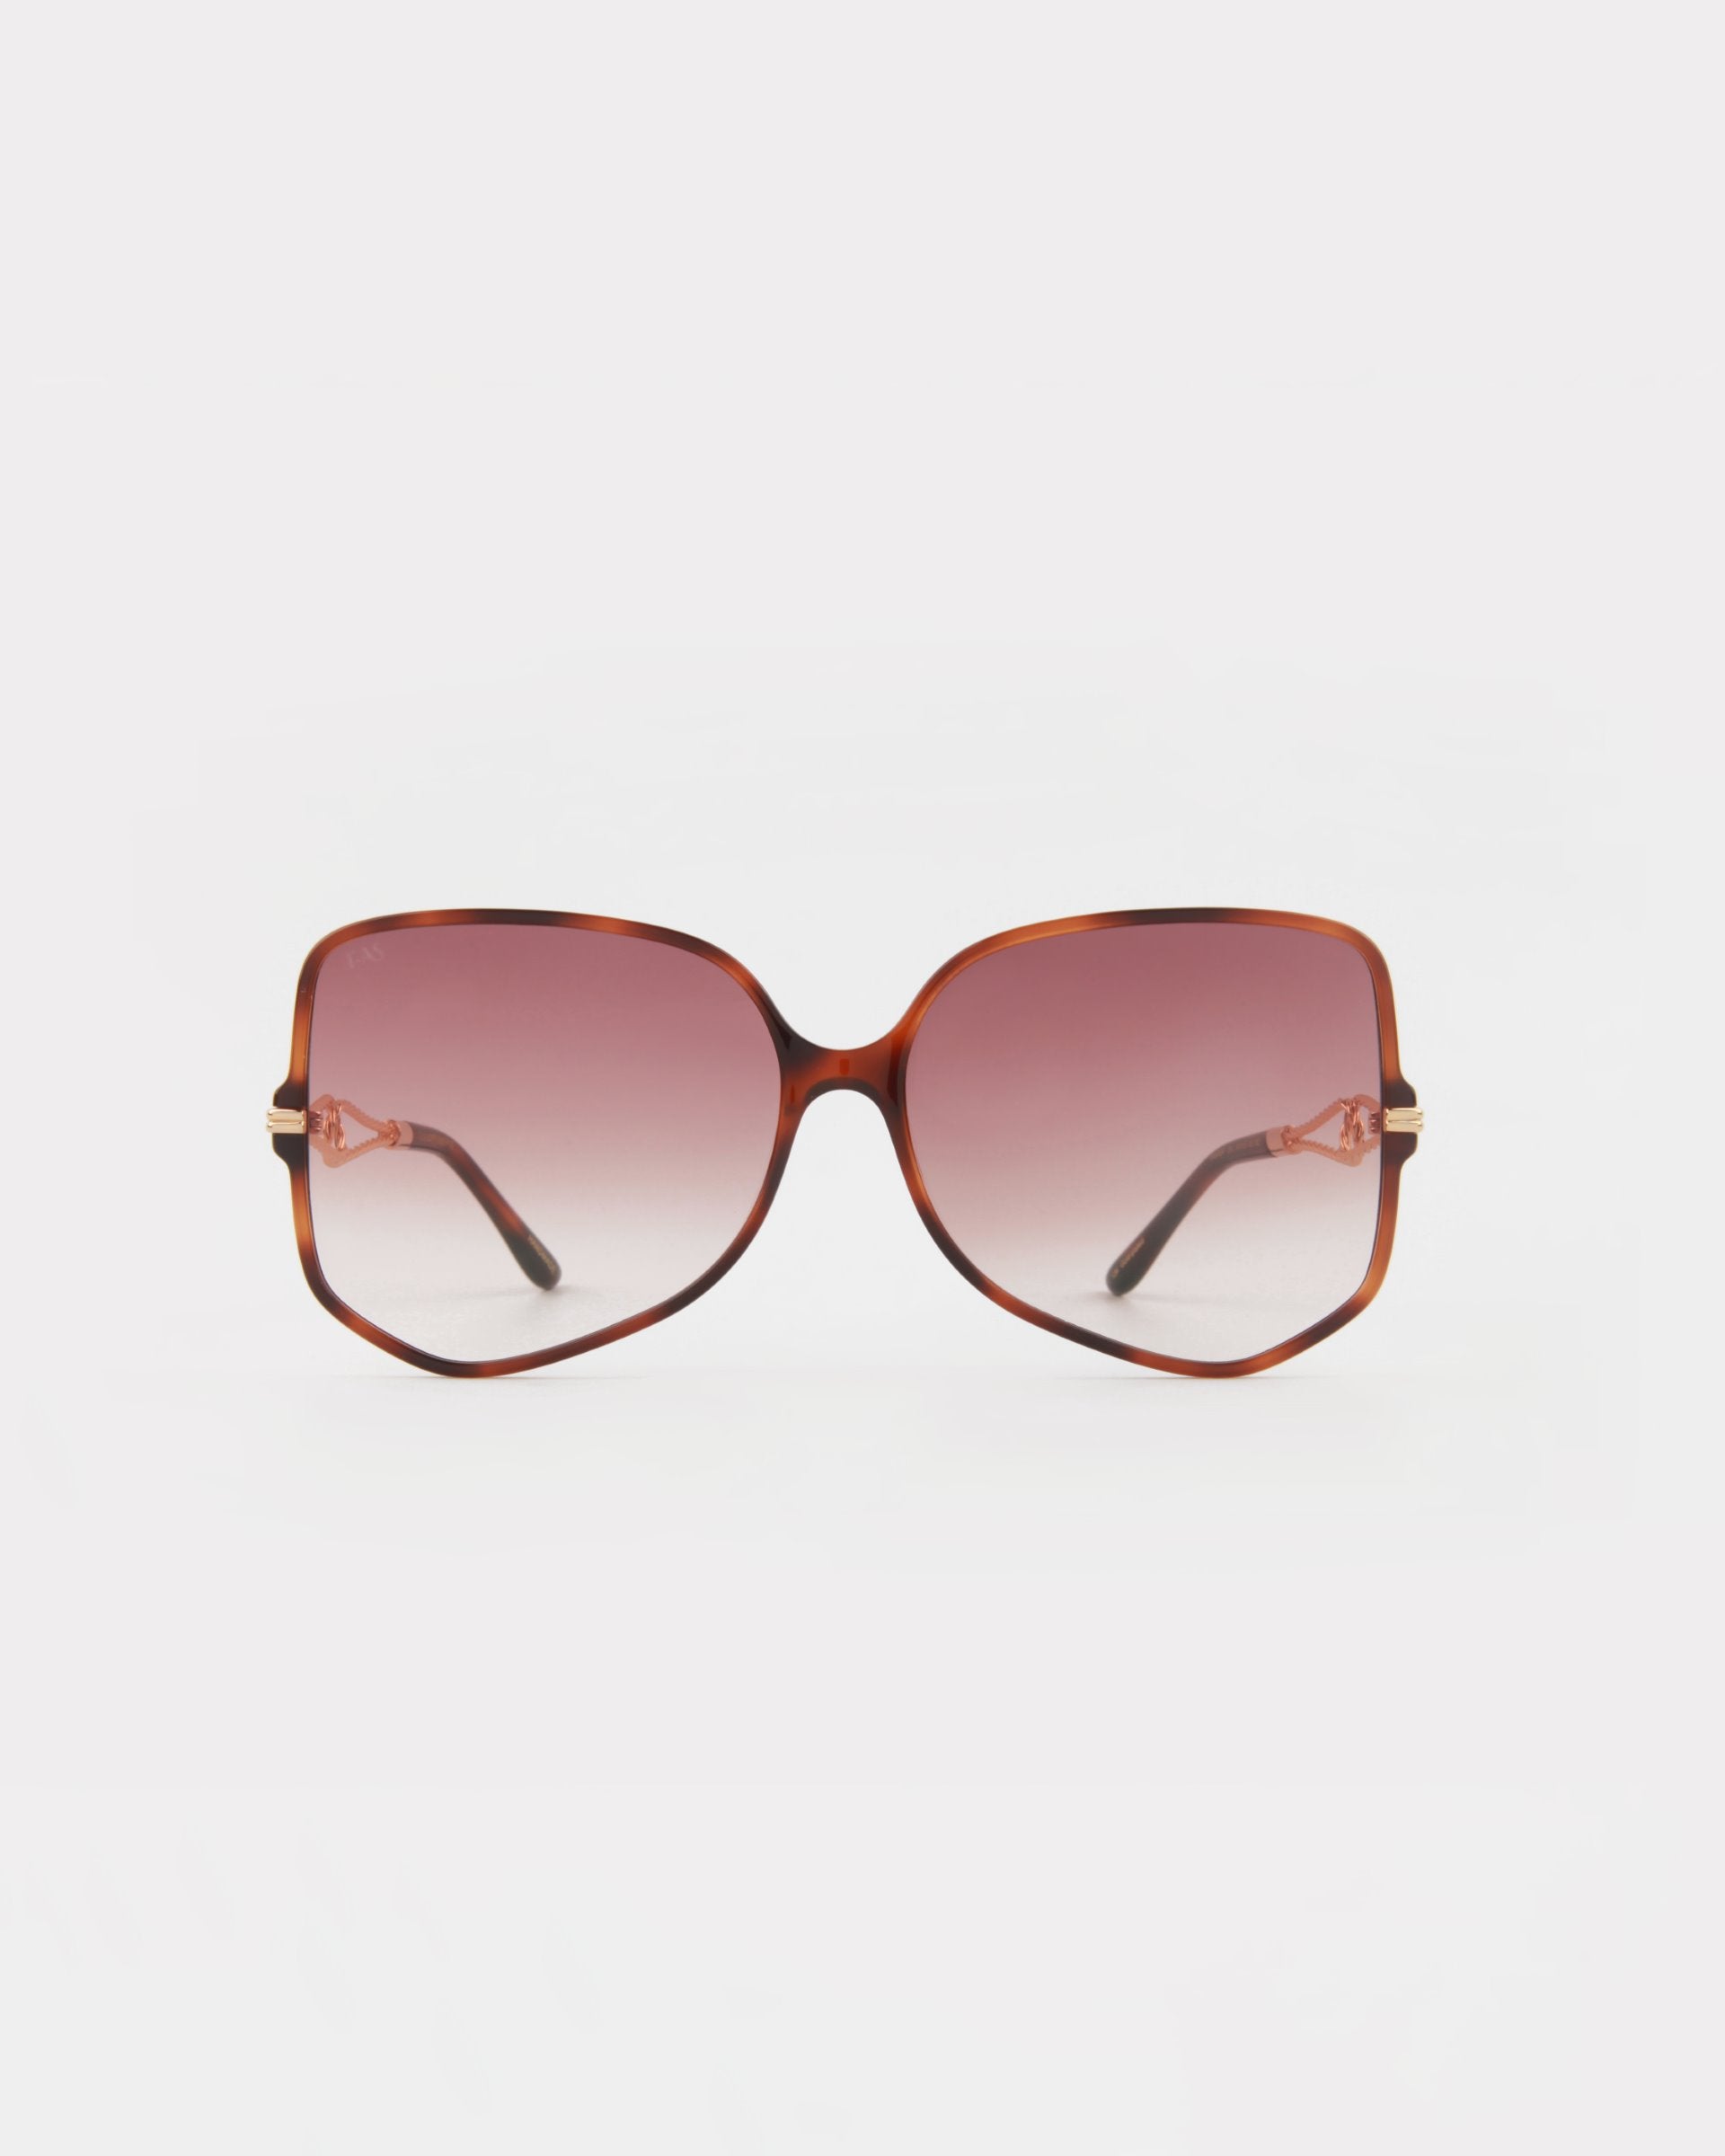 A pair of Voyager oversized square-shaped sunglasses from For Art&#39;s Sake® with brown-gradient lenses and tortoiseshell, gold-plated frames. The arms of the glasses are thin and match the frame color. Offering UVA &amp; UVB protection, this stylish eyewear is set against a plain white background.